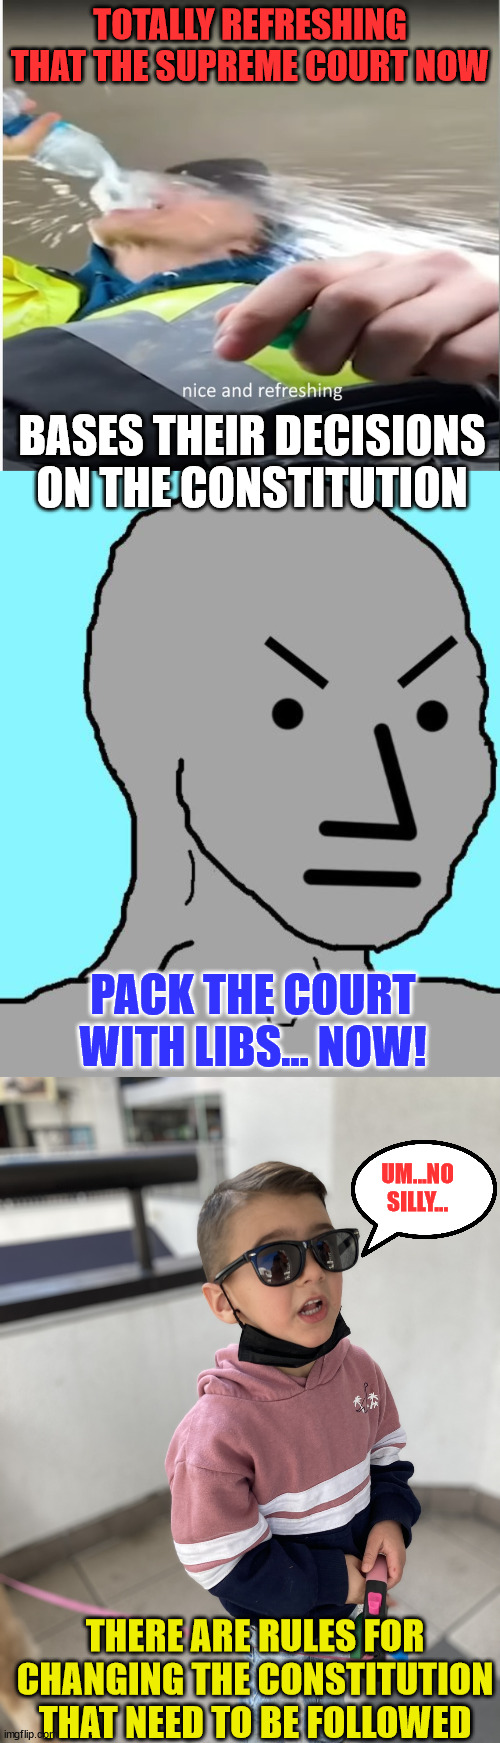 Adhere to the Constitution. It's what the Supreme Court is doing... | TOTALLY REFRESHING THAT THE SUPREME COURT NOW; BASES THEIR DECISIONS ON THE CONSTITUTION; PACK THE COURT WITH LIBS... NOW! UM...NO SILLY... THERE ARE RULES FOR CHANGING THE CONSTITUTION THAT NEED TO BE FOLLOWED | image tagged in nice and refreshing,npc meme angry,um no,scotus | made w/ Imgflip meme maker